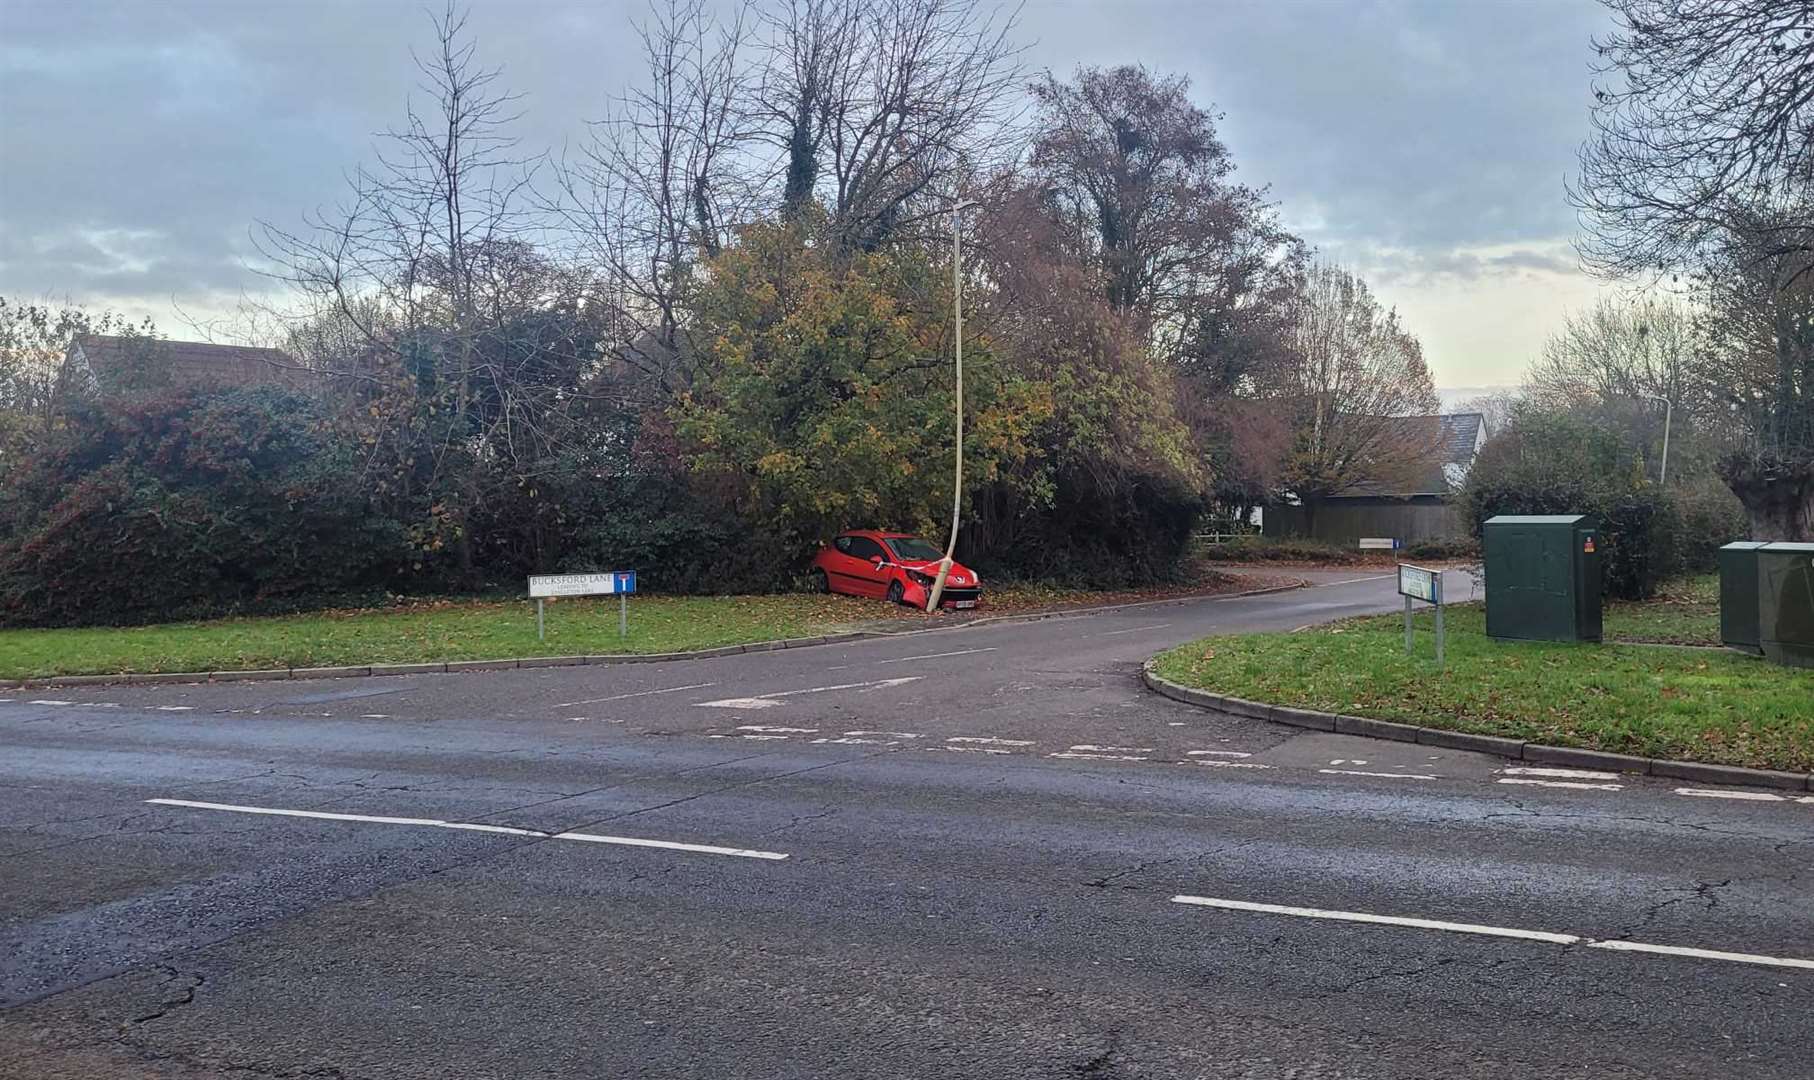 The incident happened in Bucksford Lane at the junction with Tithe Barn Lane